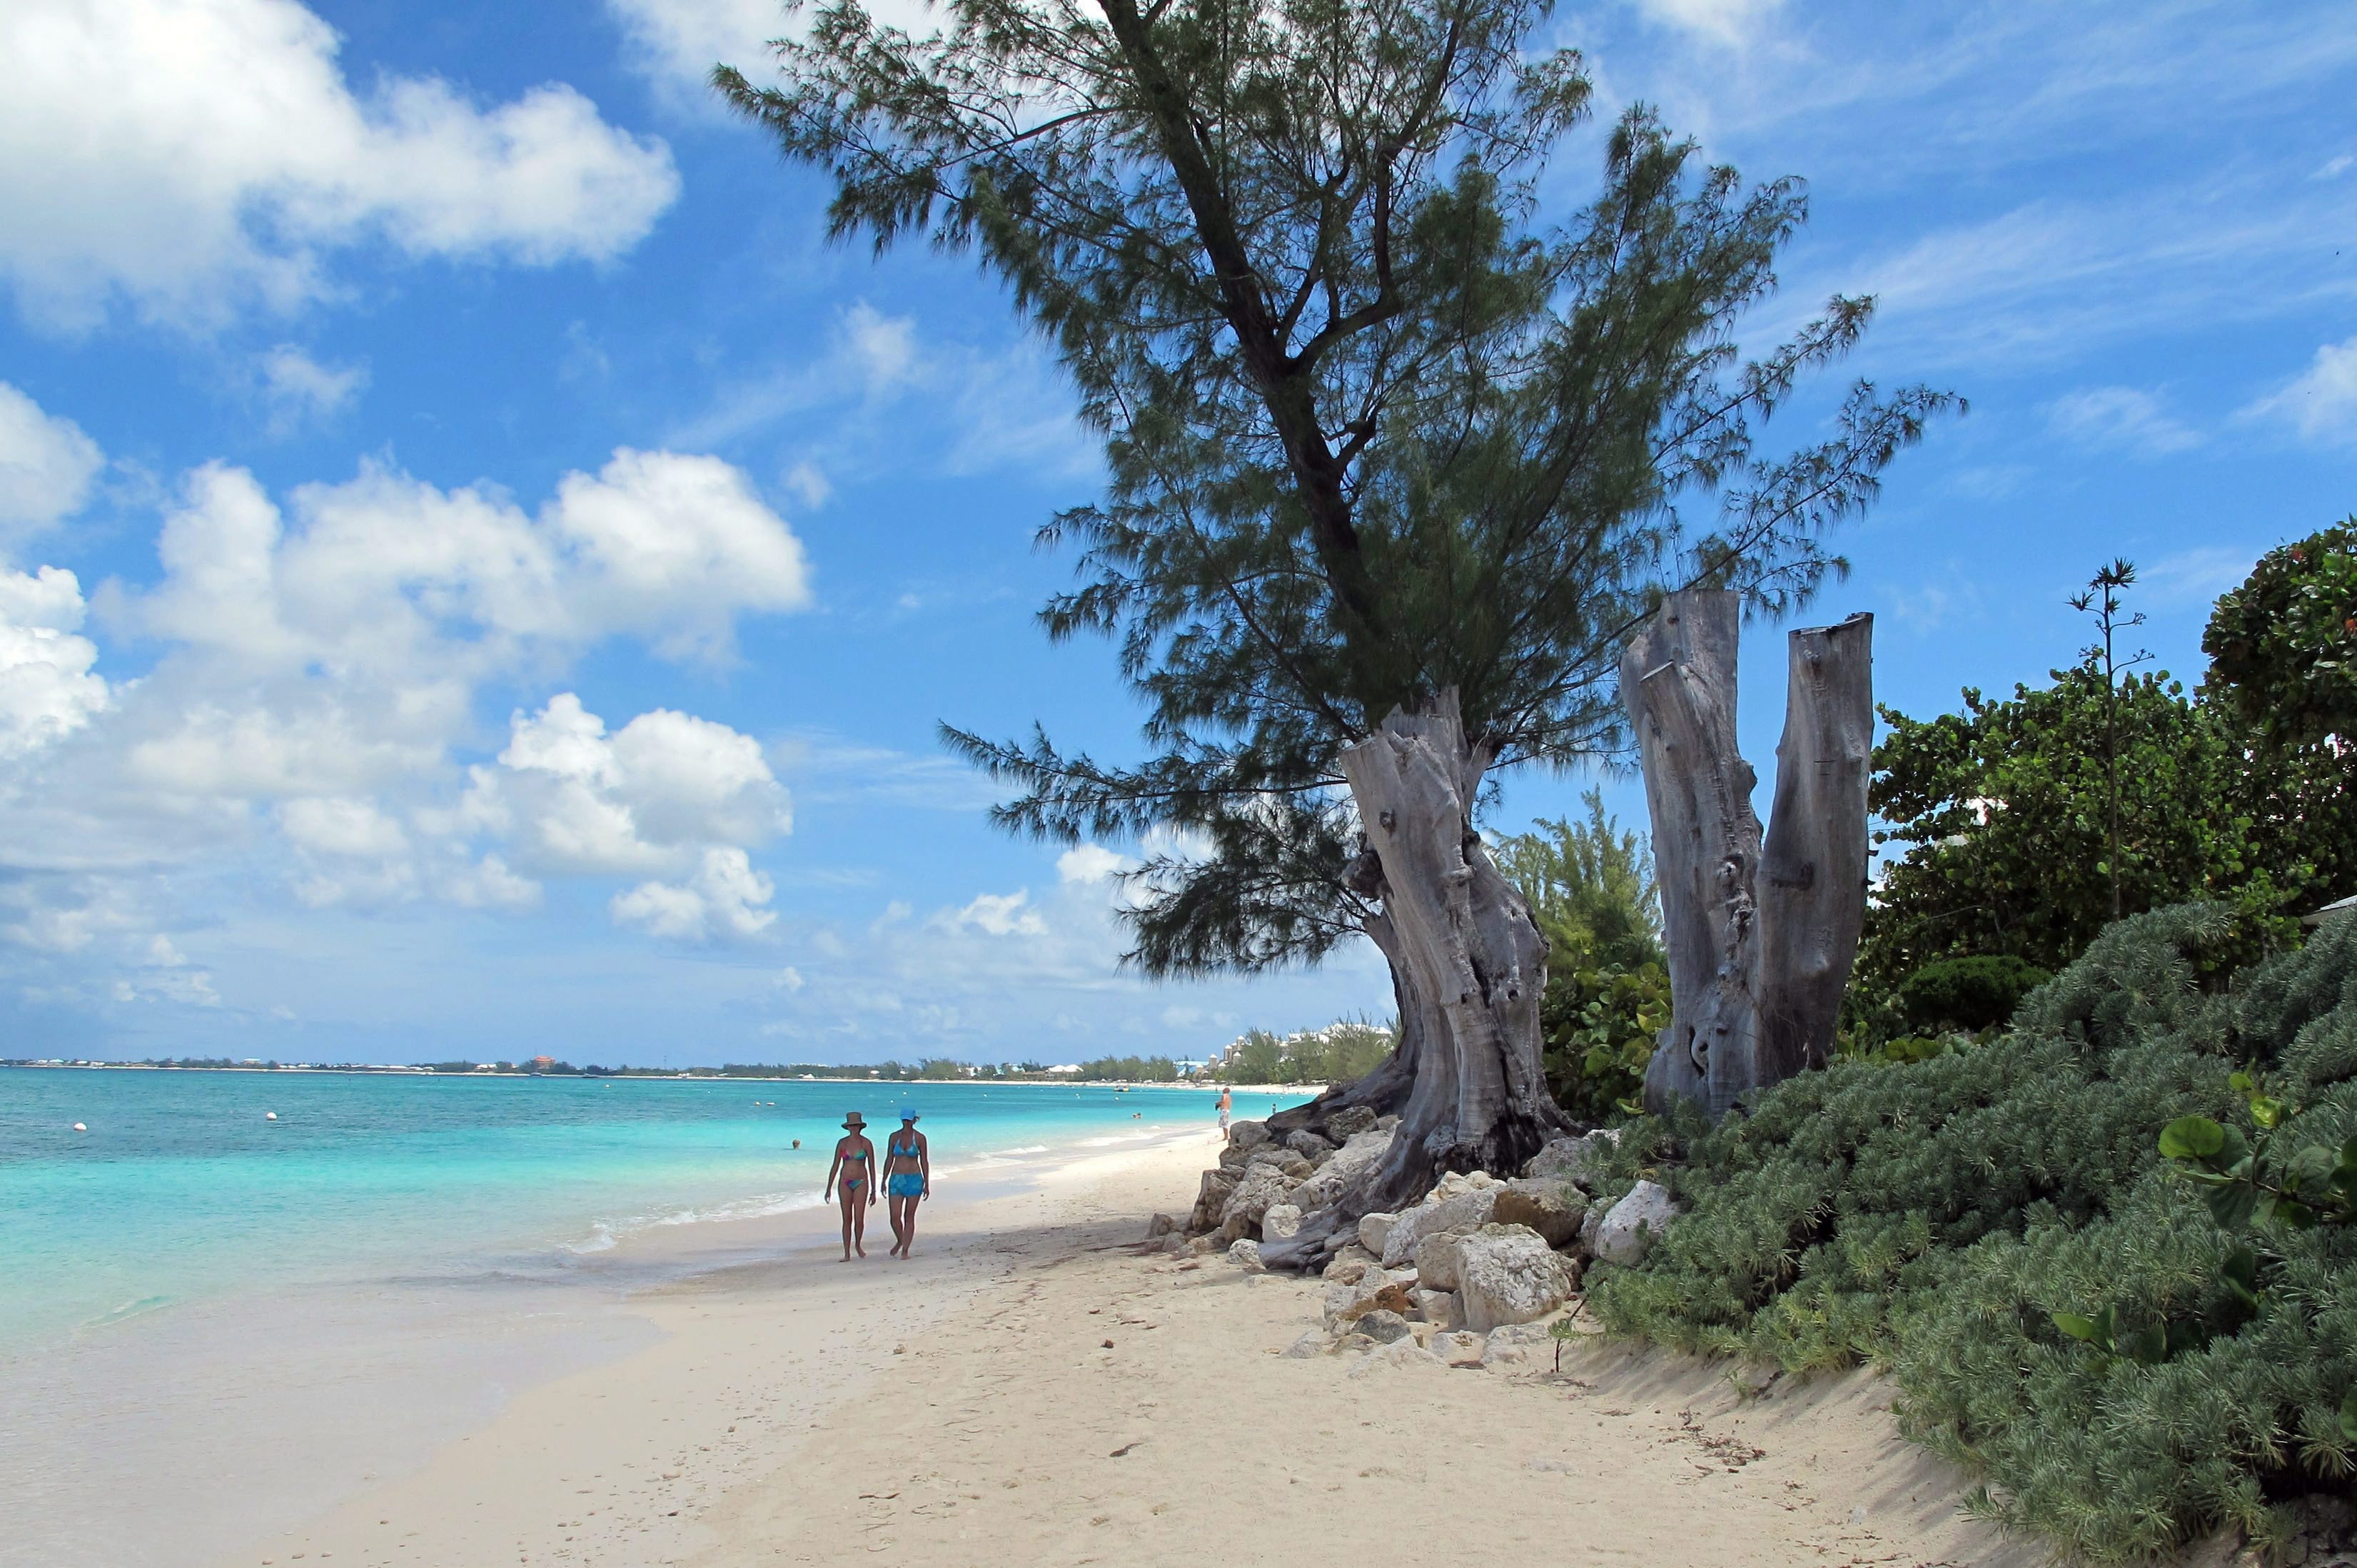 Two tourists walk along a white-sand beach lined with trees and shrubs.